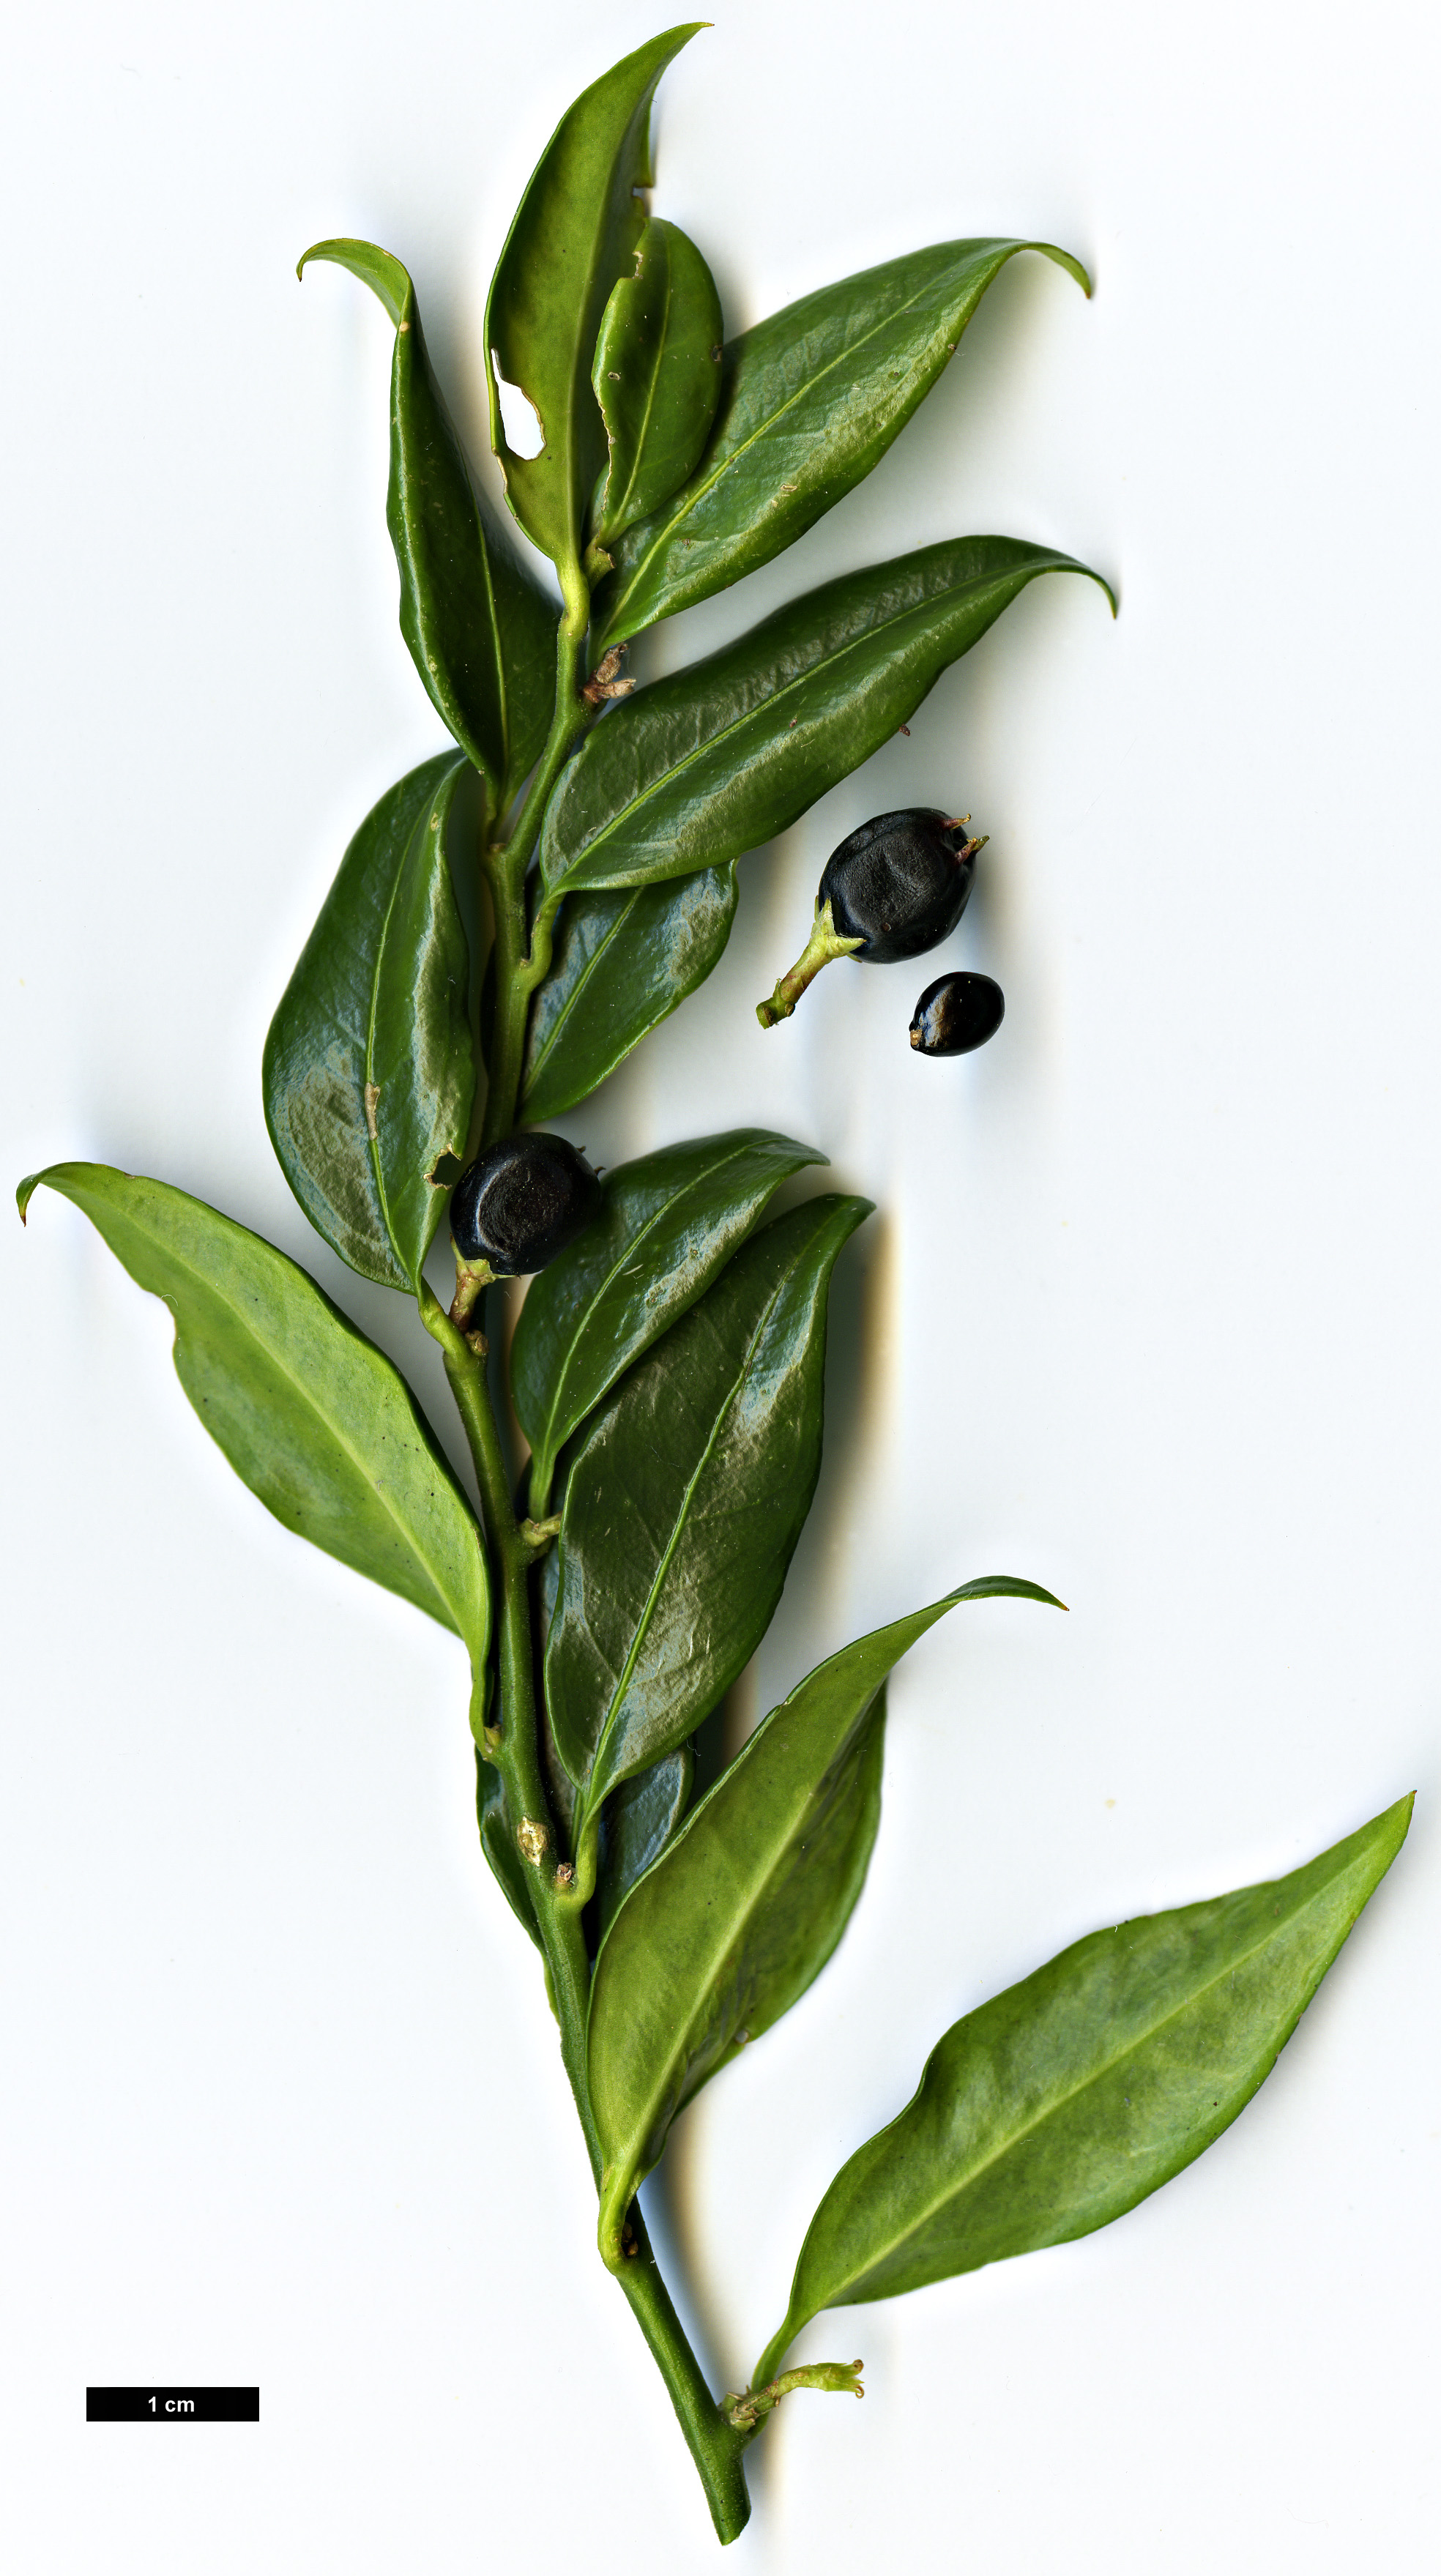 High resolution image: Family: Buxaceae - Genus: Sarcococca - Taxon: confusa